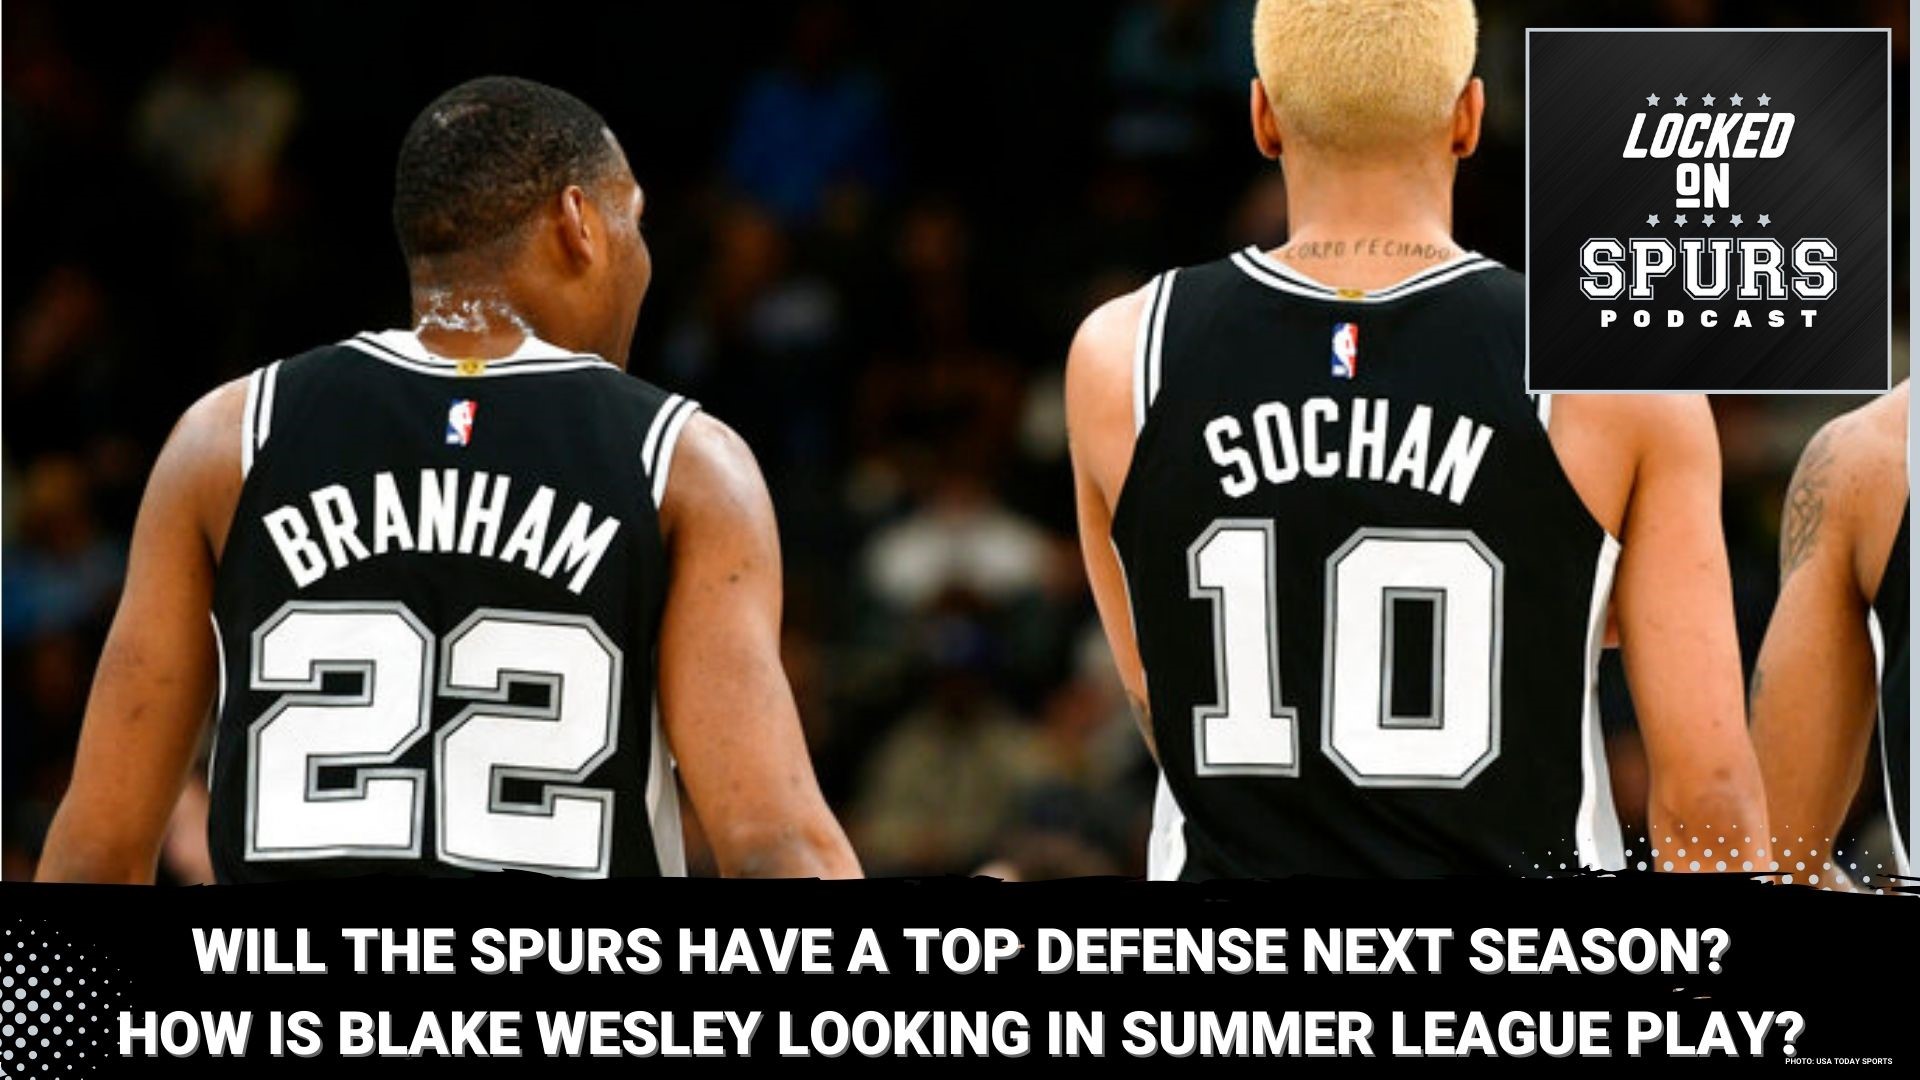 On paper, the Spurs are looking like one of the best defensive teams ahead of next season.